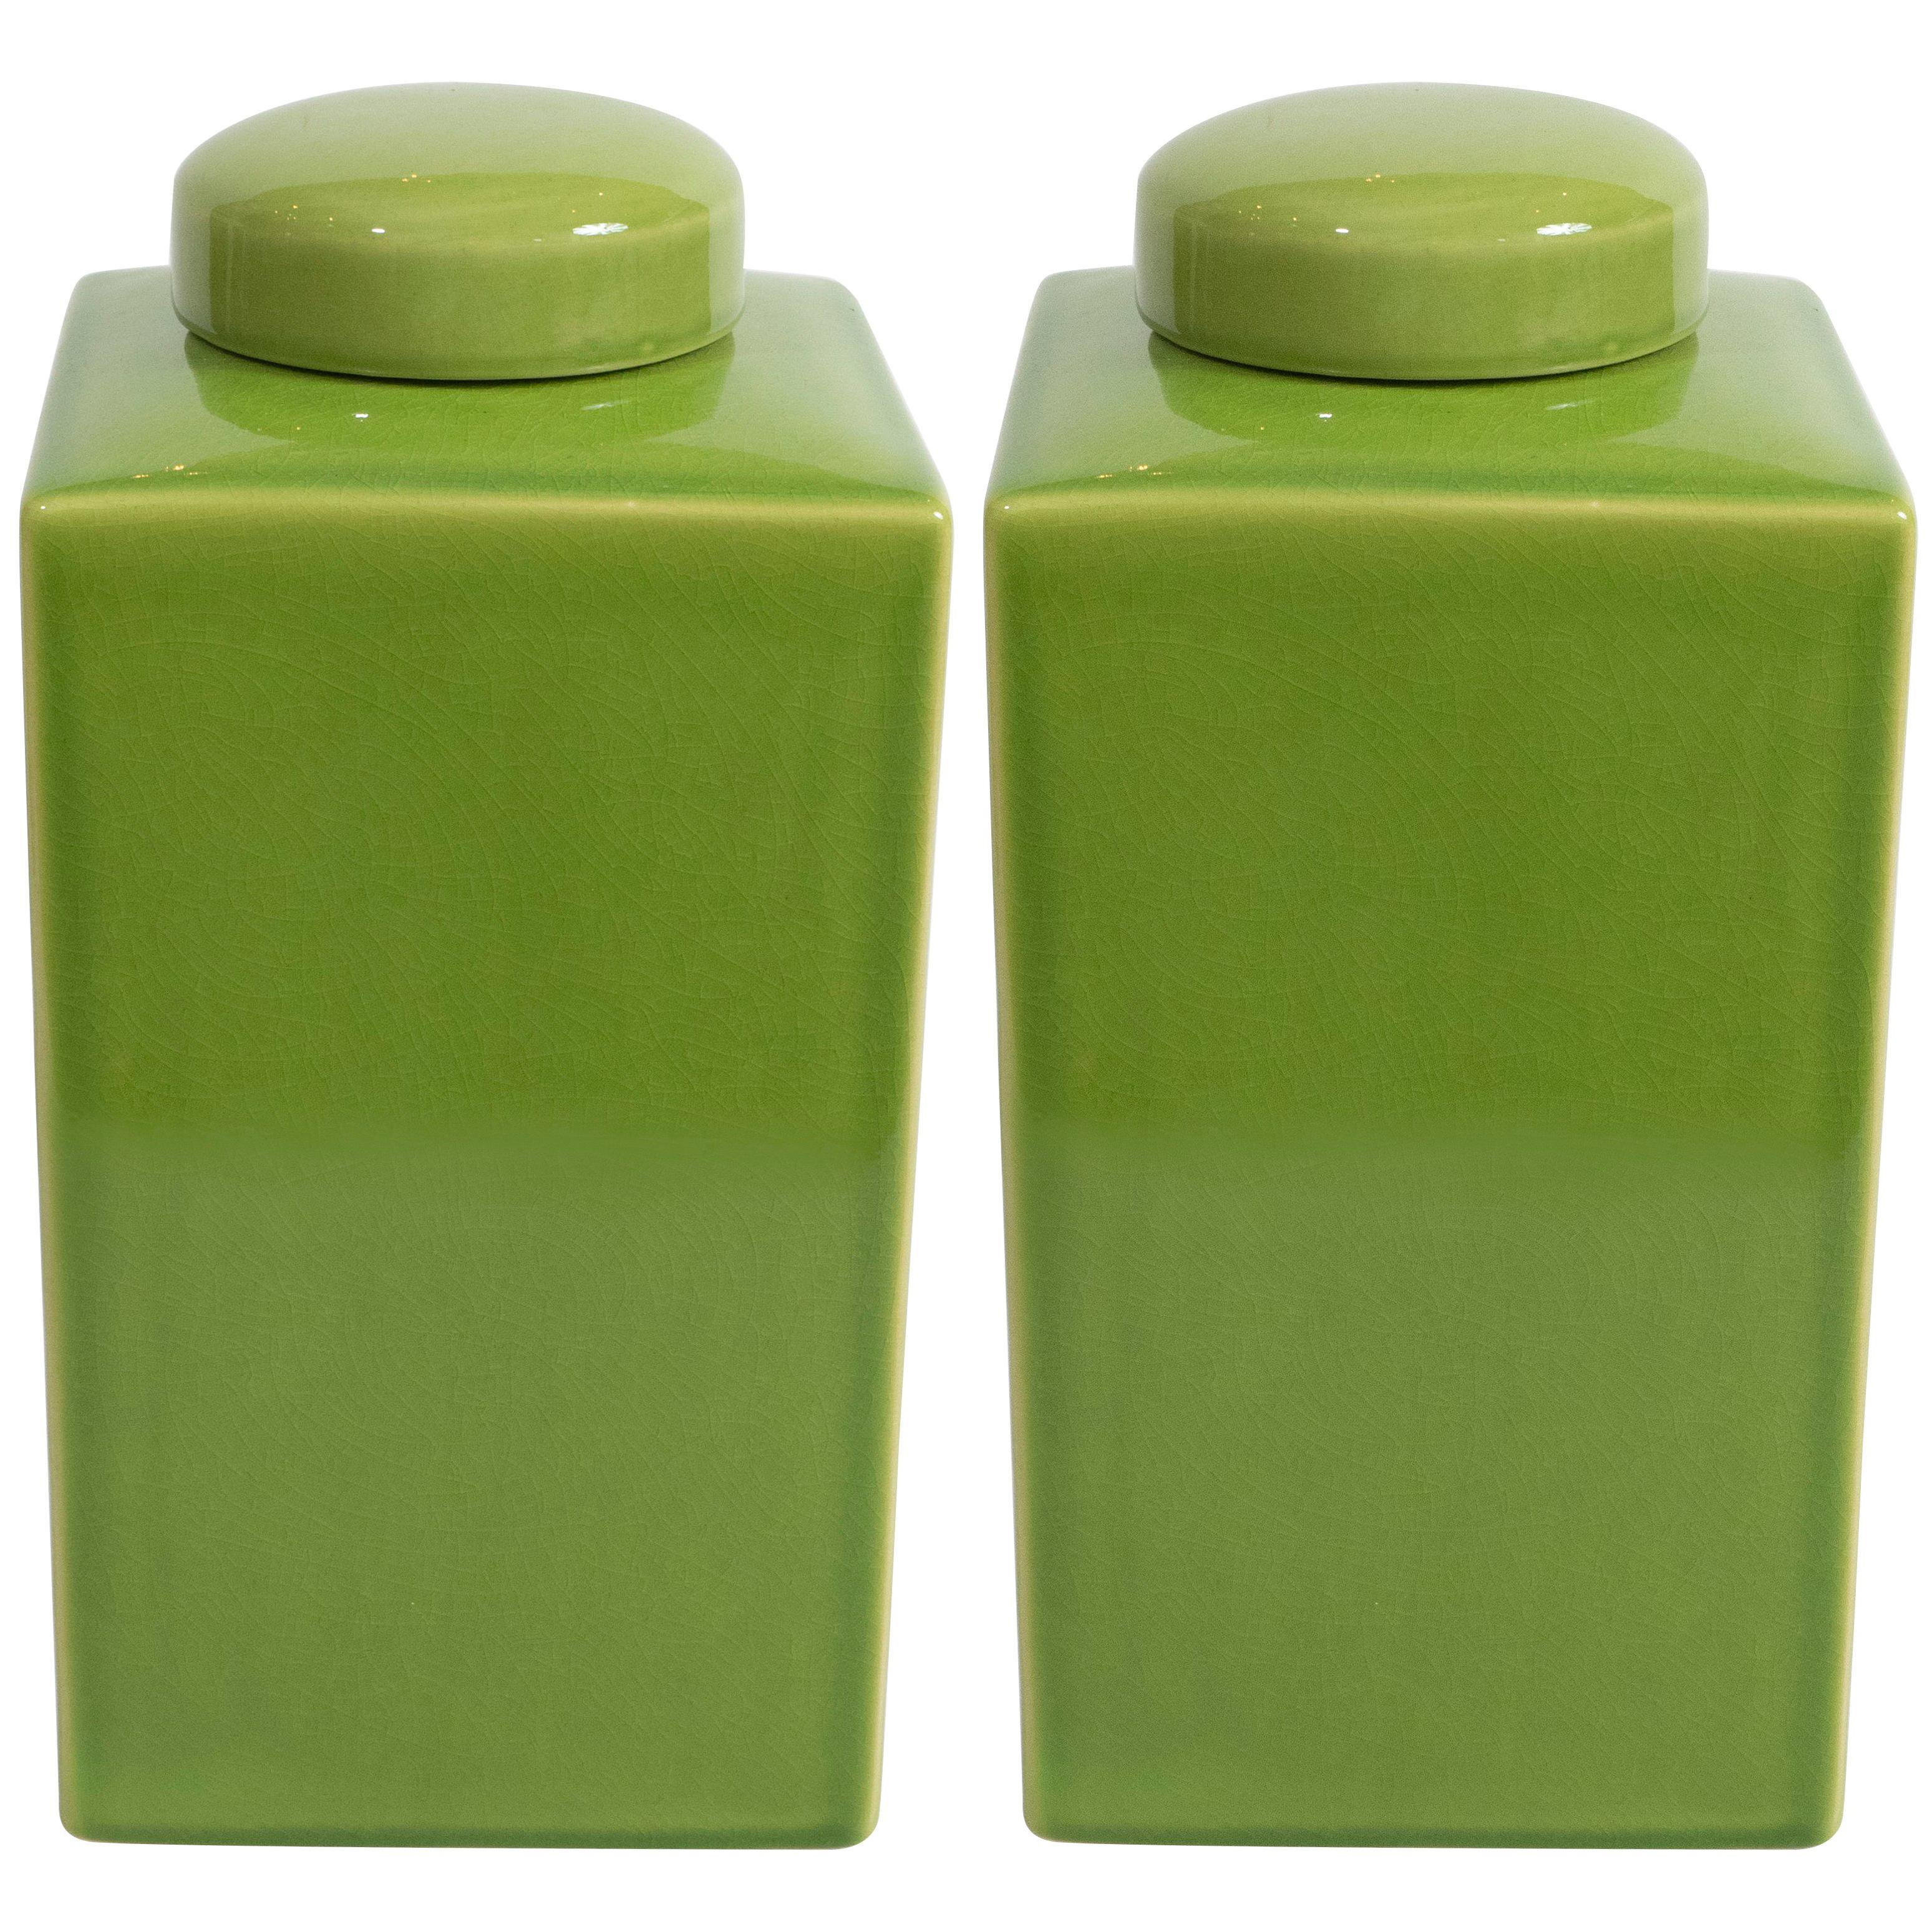 Pair of Green Jars with Lids